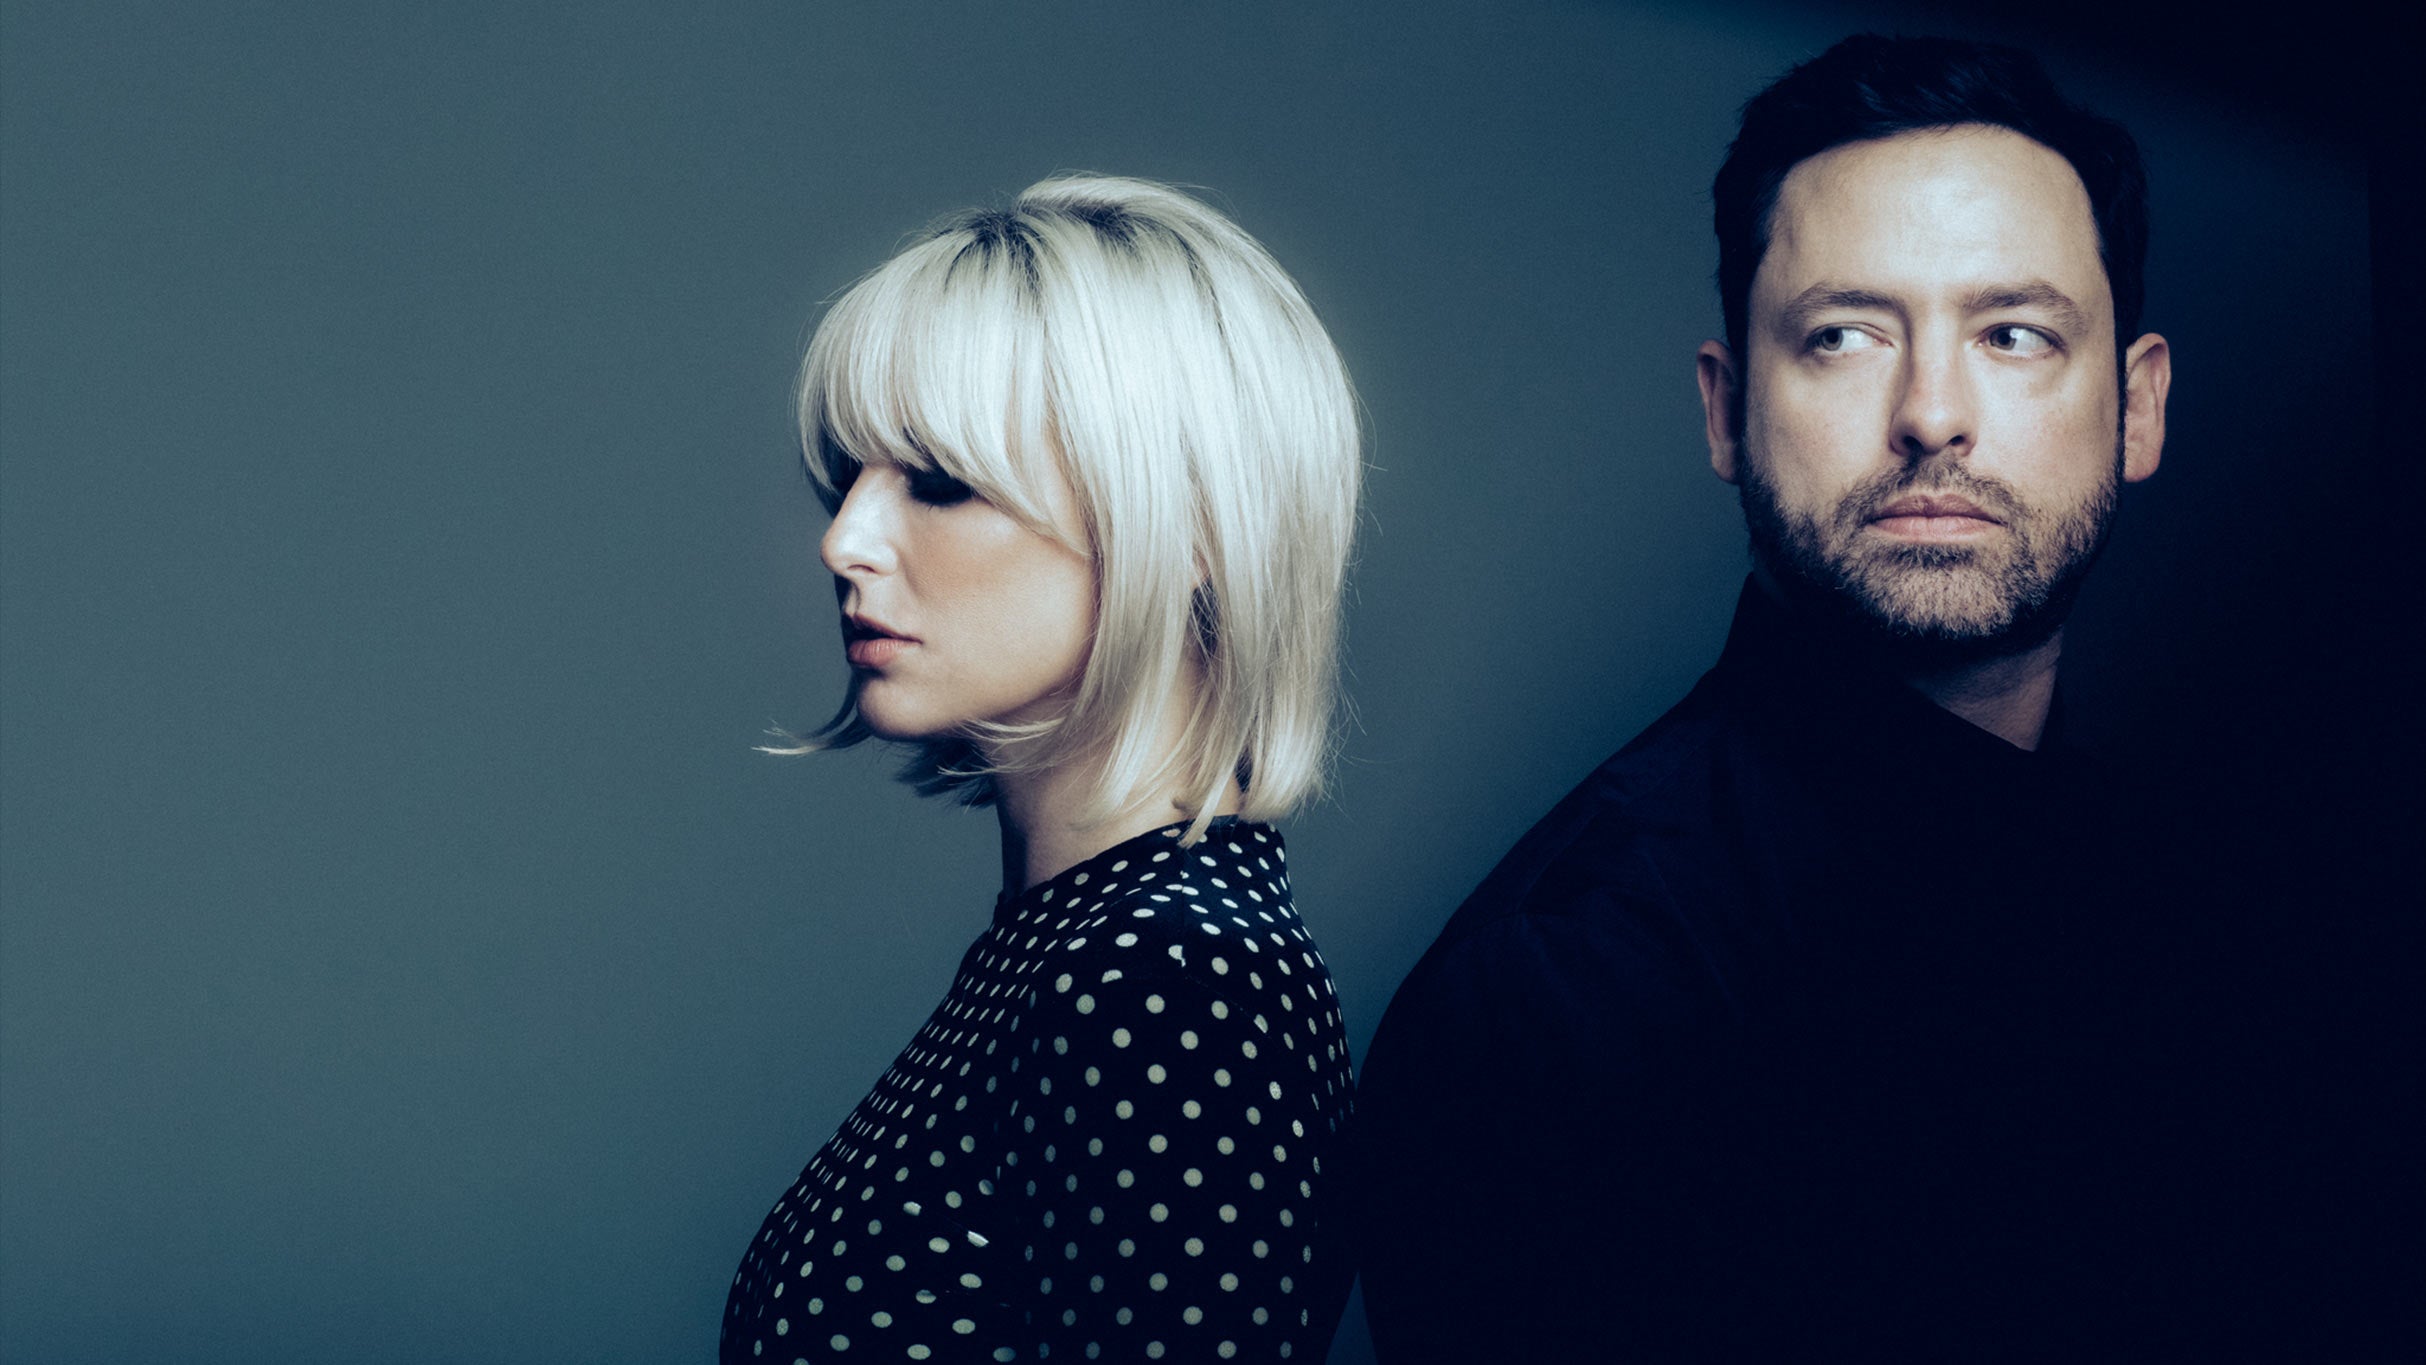 Phantogram pre-sale code for your tickets in Cleveland